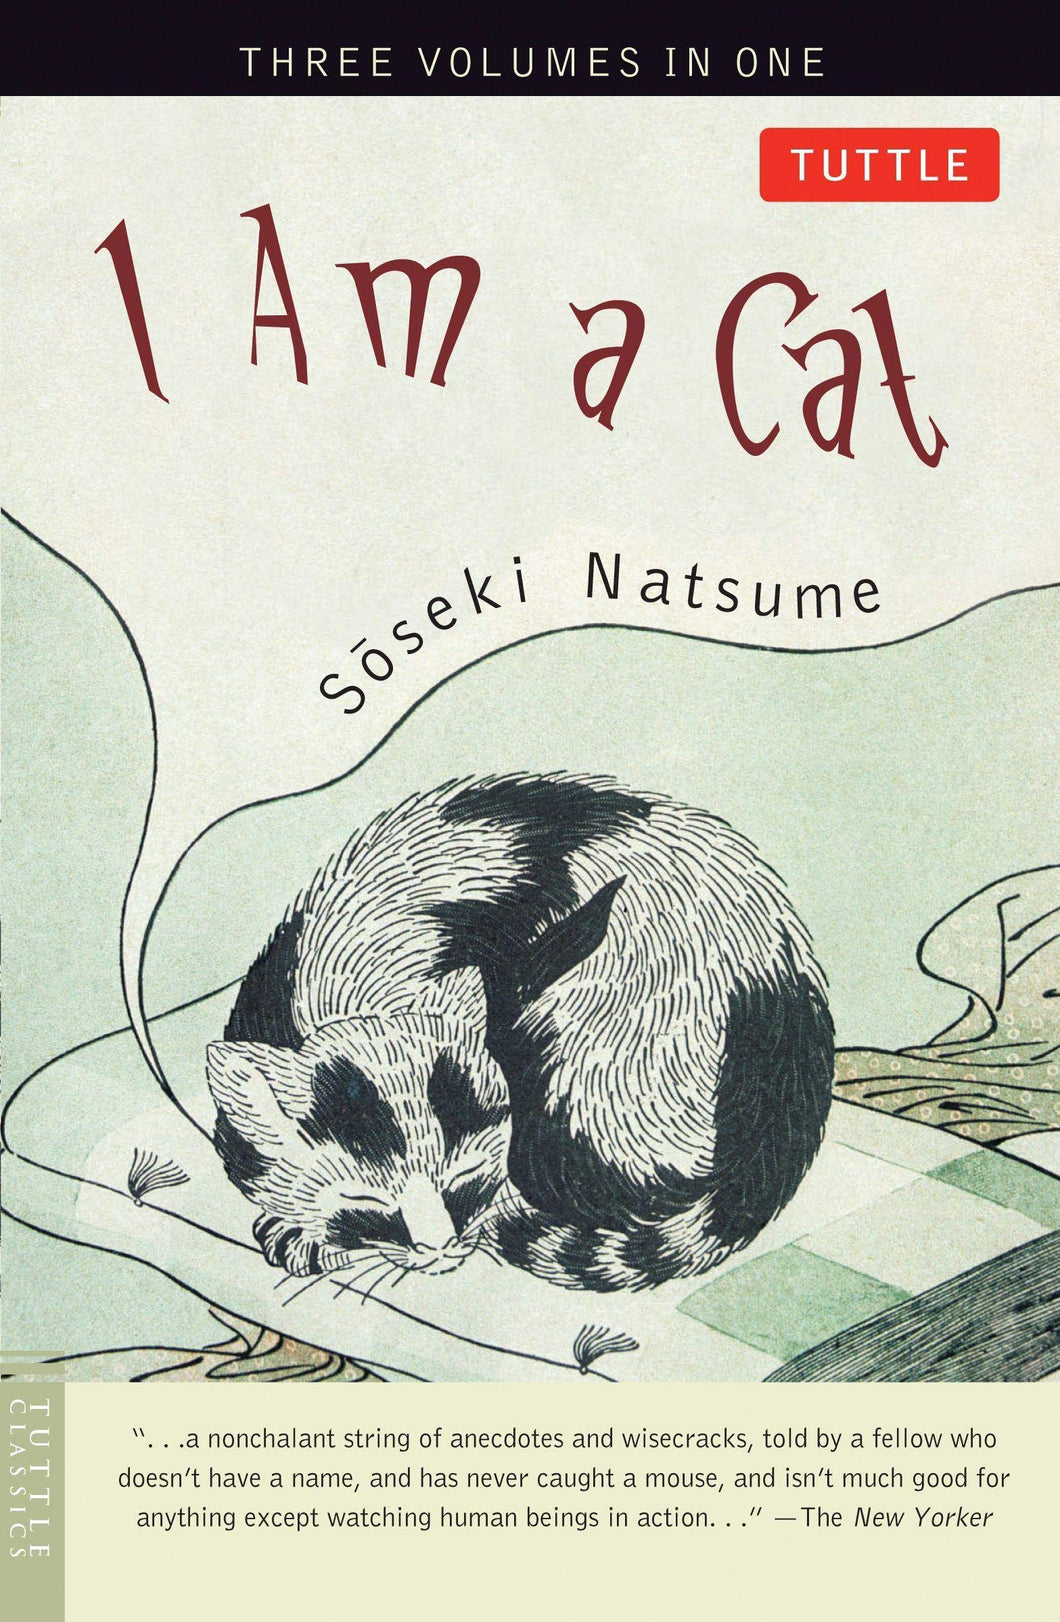 I Am a Cat by Soseki Natsume